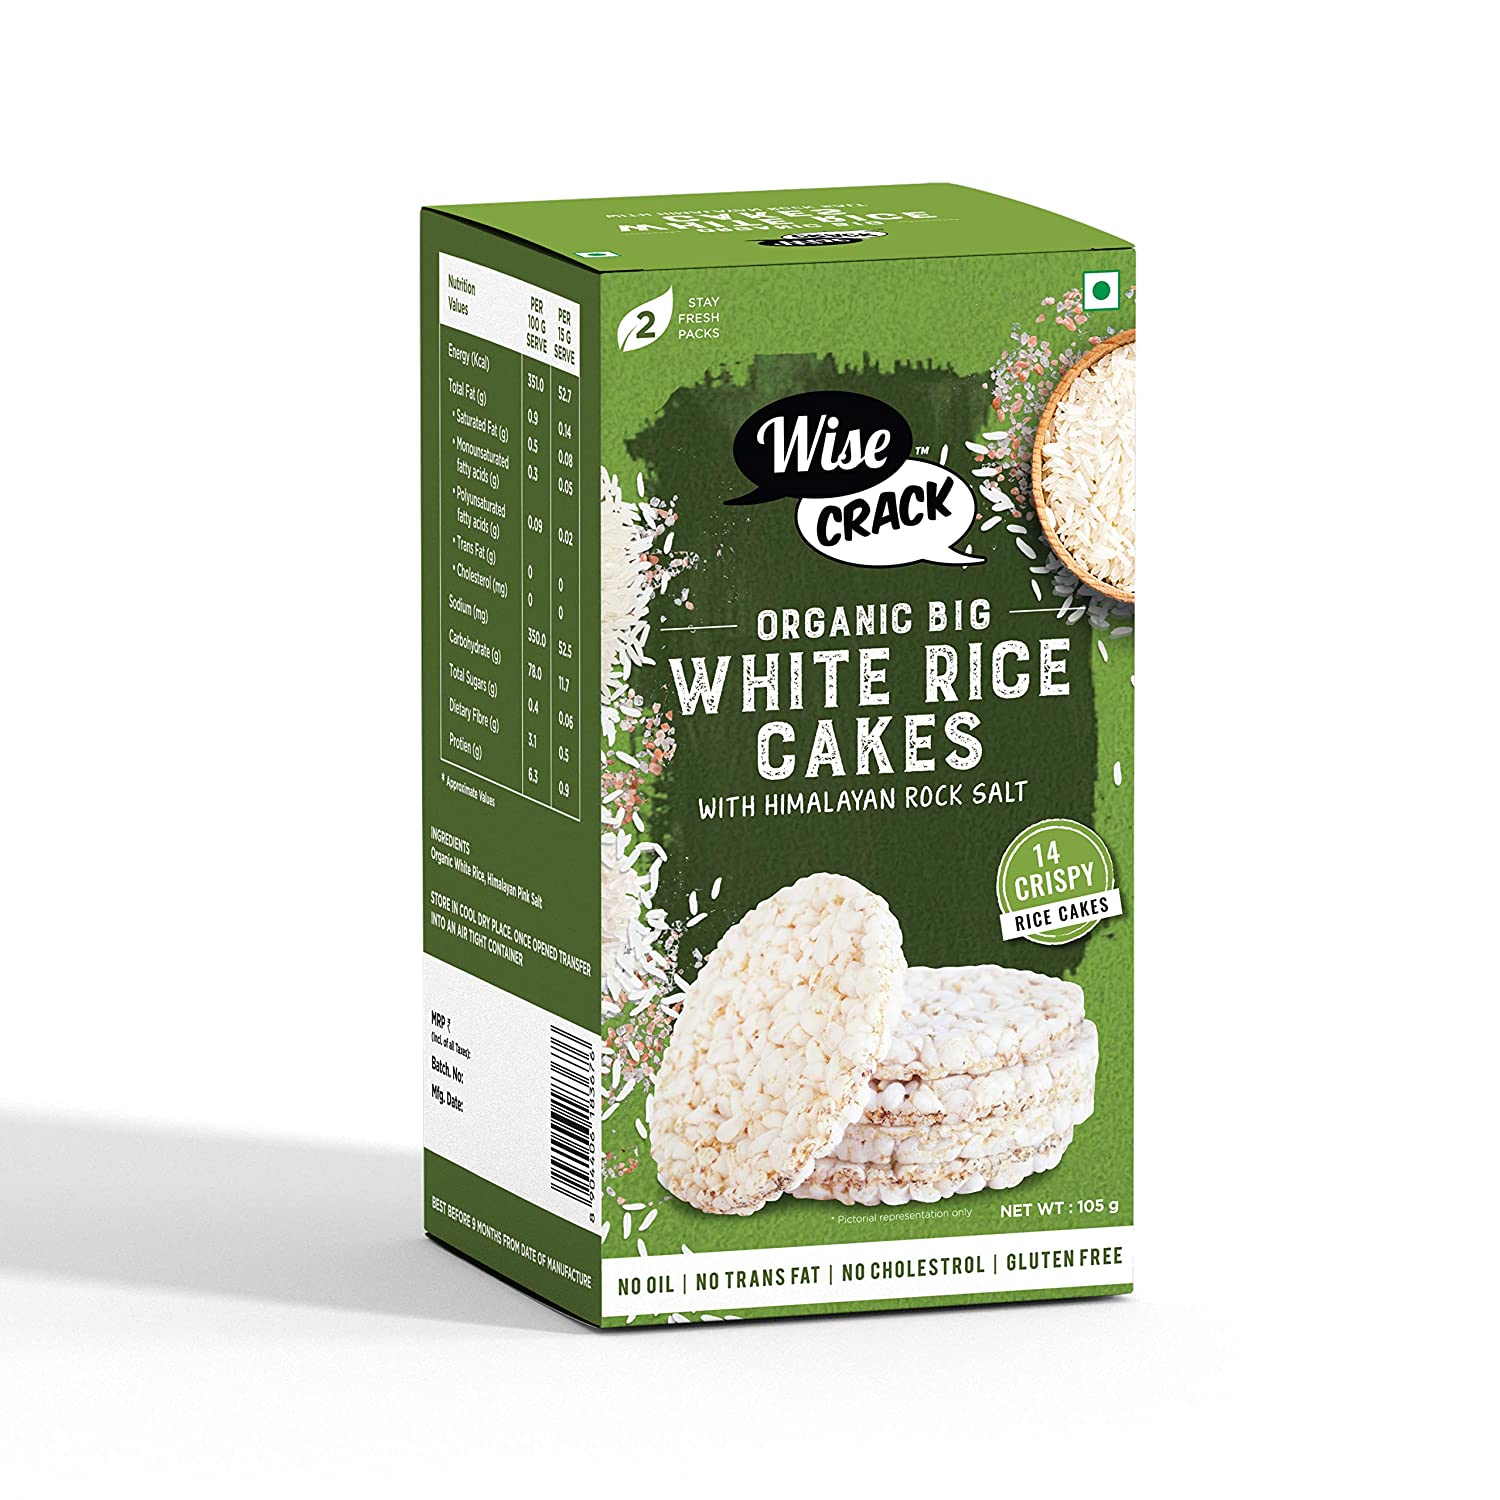 Rice Cake Protein Snacks: A Game-Changing Health Trend